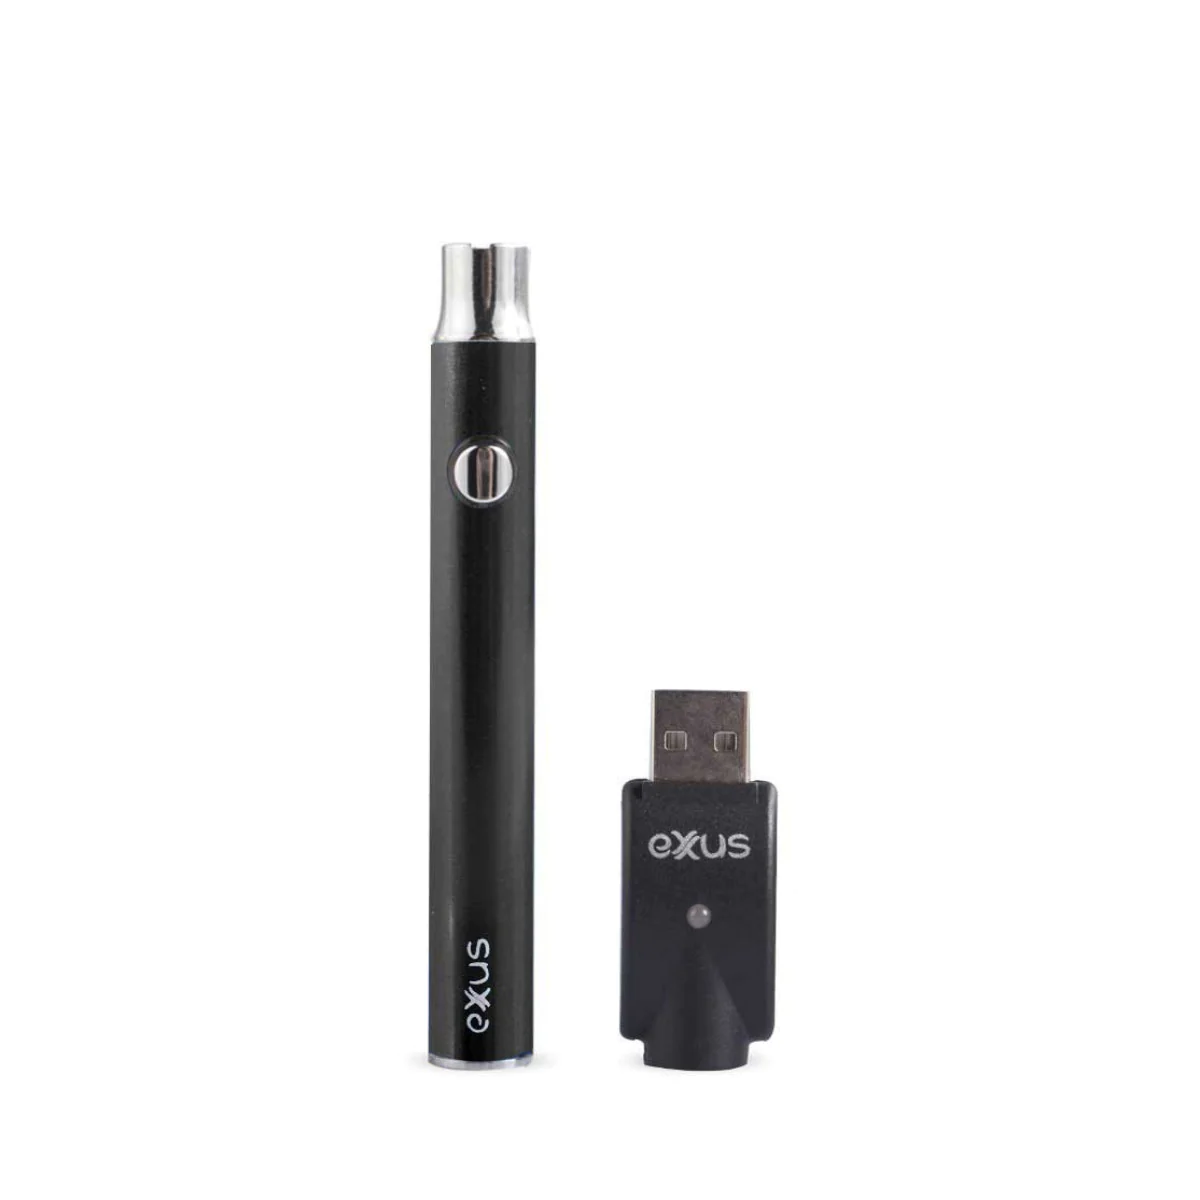 Cartridge Vaporizers By One Stoppipe Shop-Comprehensive Review Unveiling the Top Cartridge Vaporizers